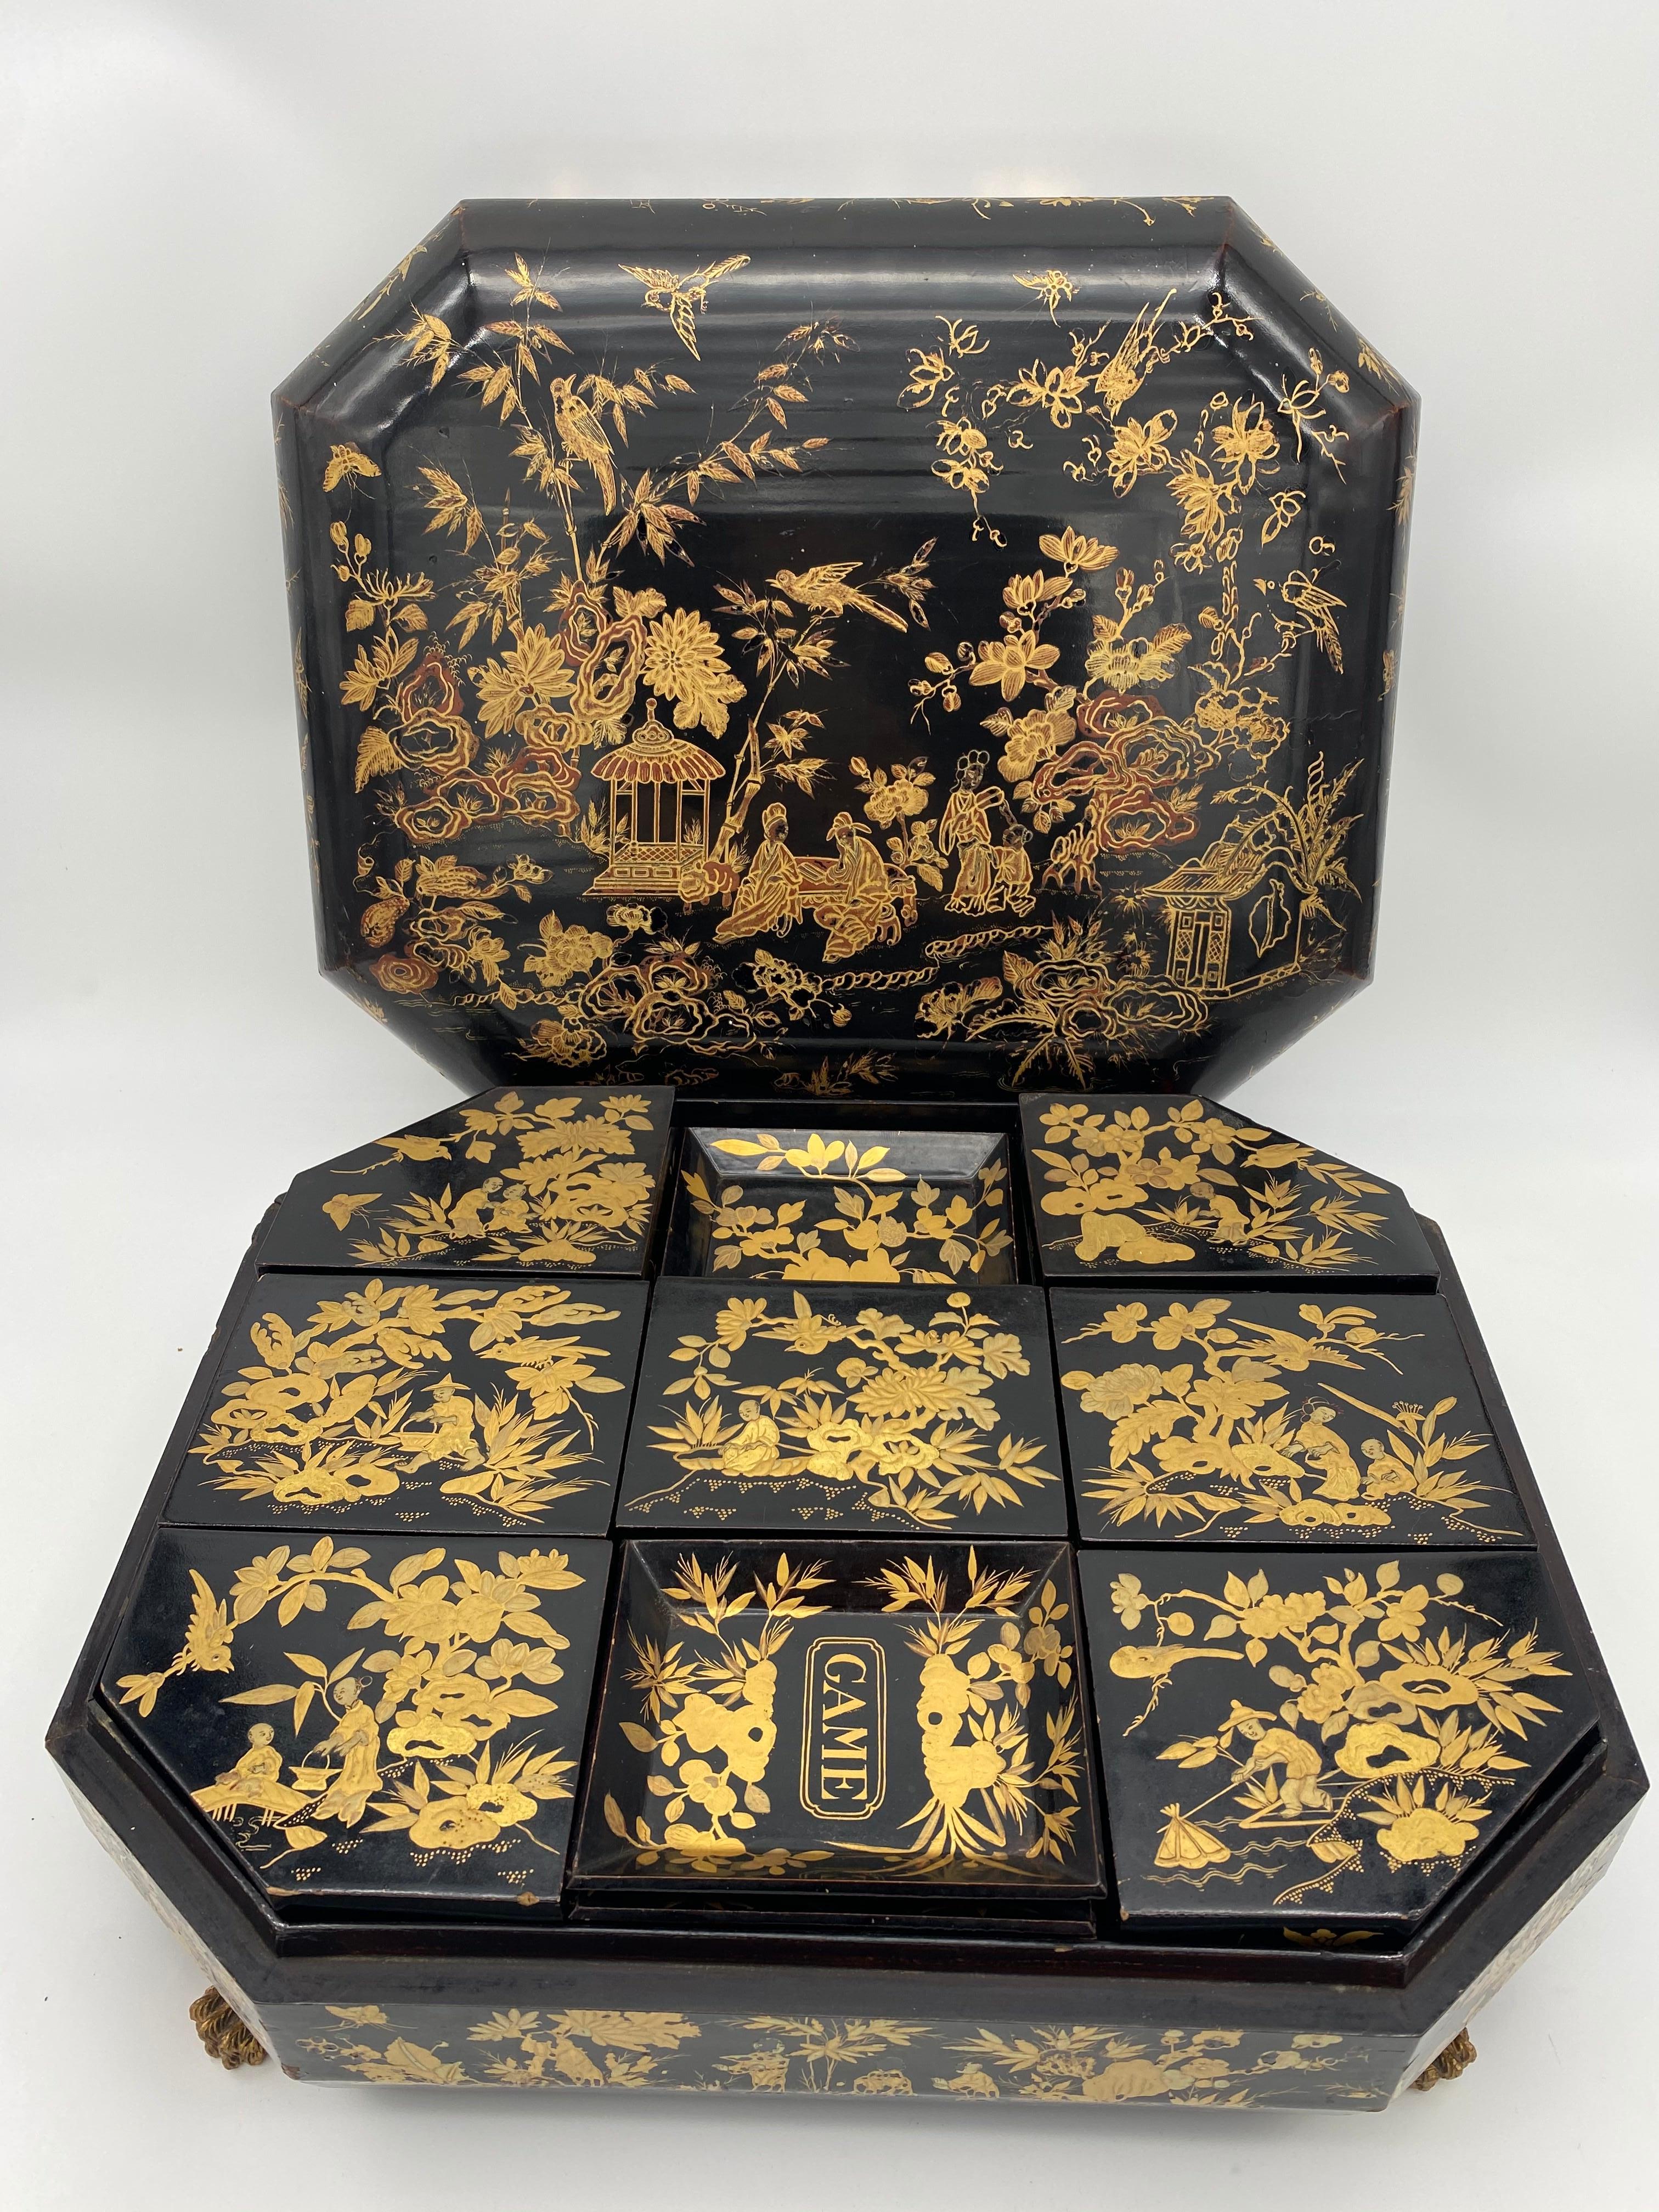 Qing Antique 18th Century Export Chinese Lacquer Gaming Box For Sale